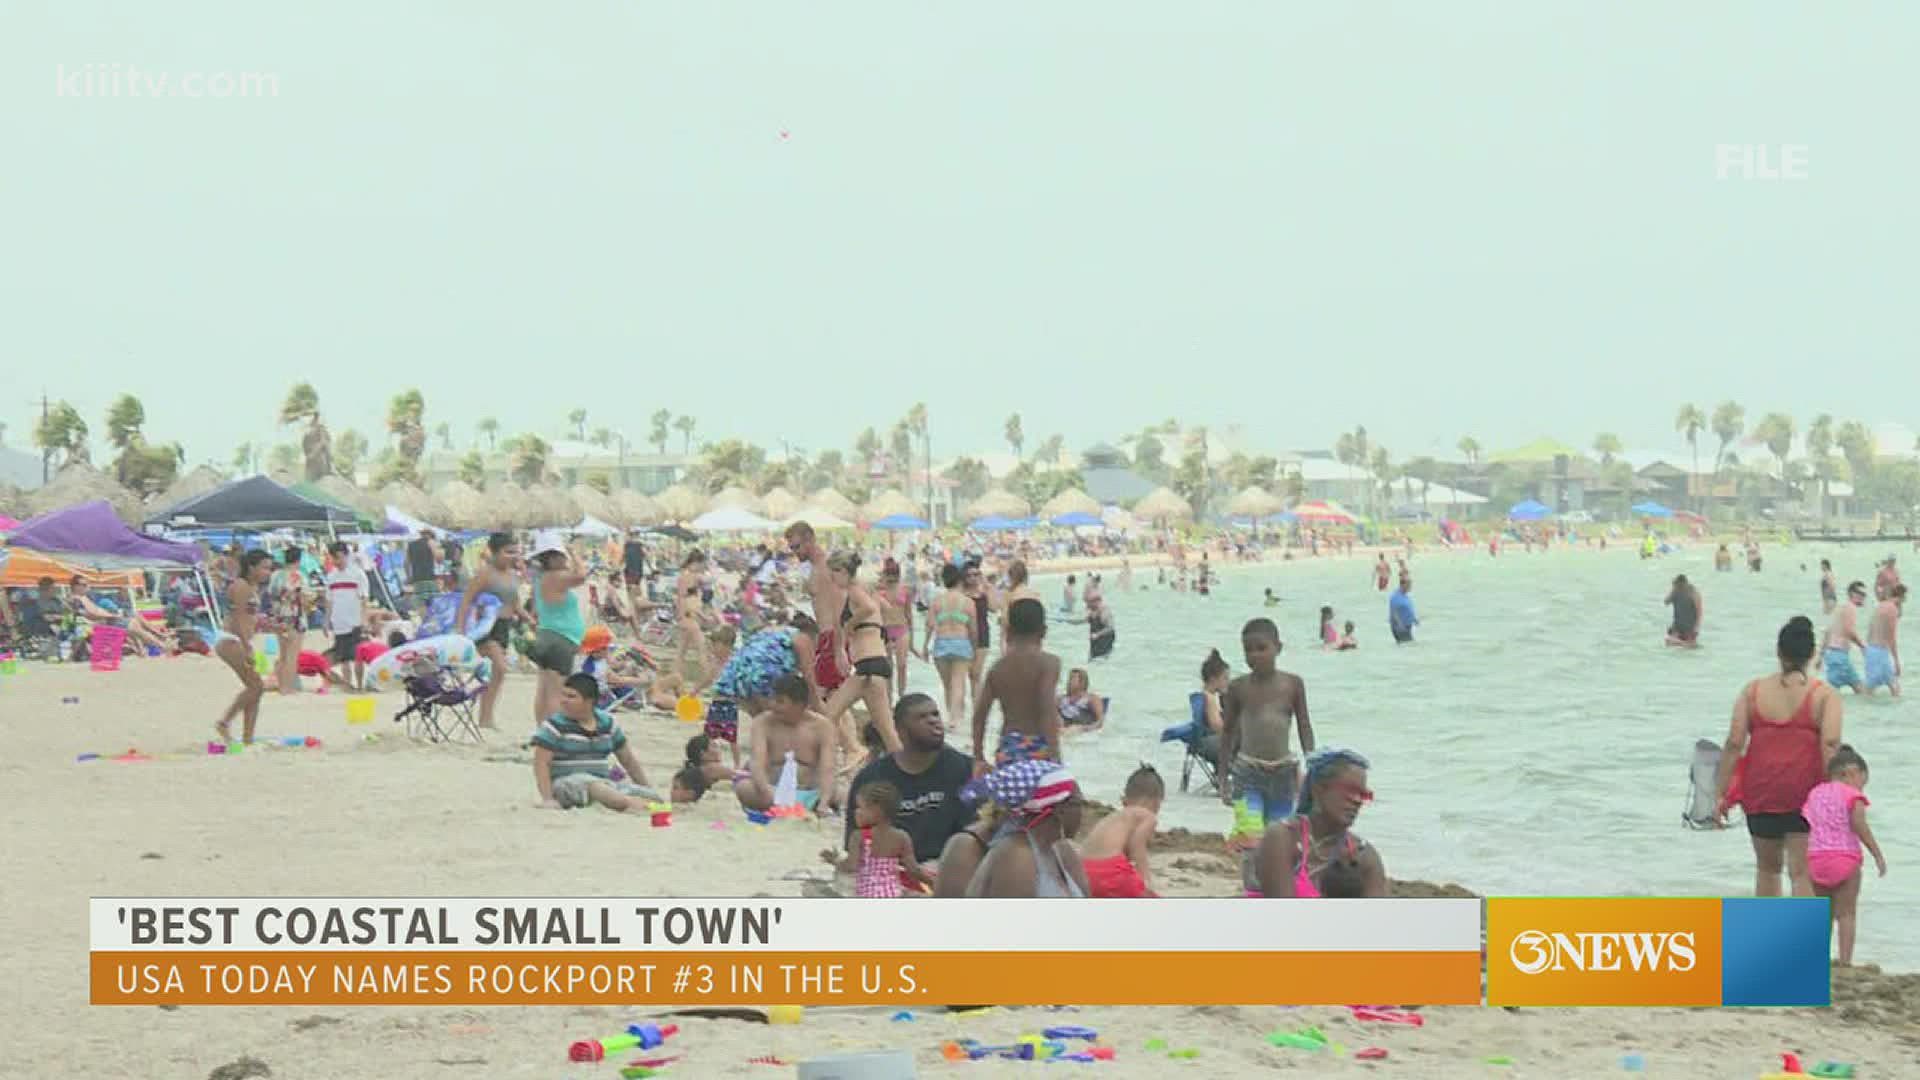 The City of Rockport is celebrating today after making USA TODAY's top ten list of coastal small towns.